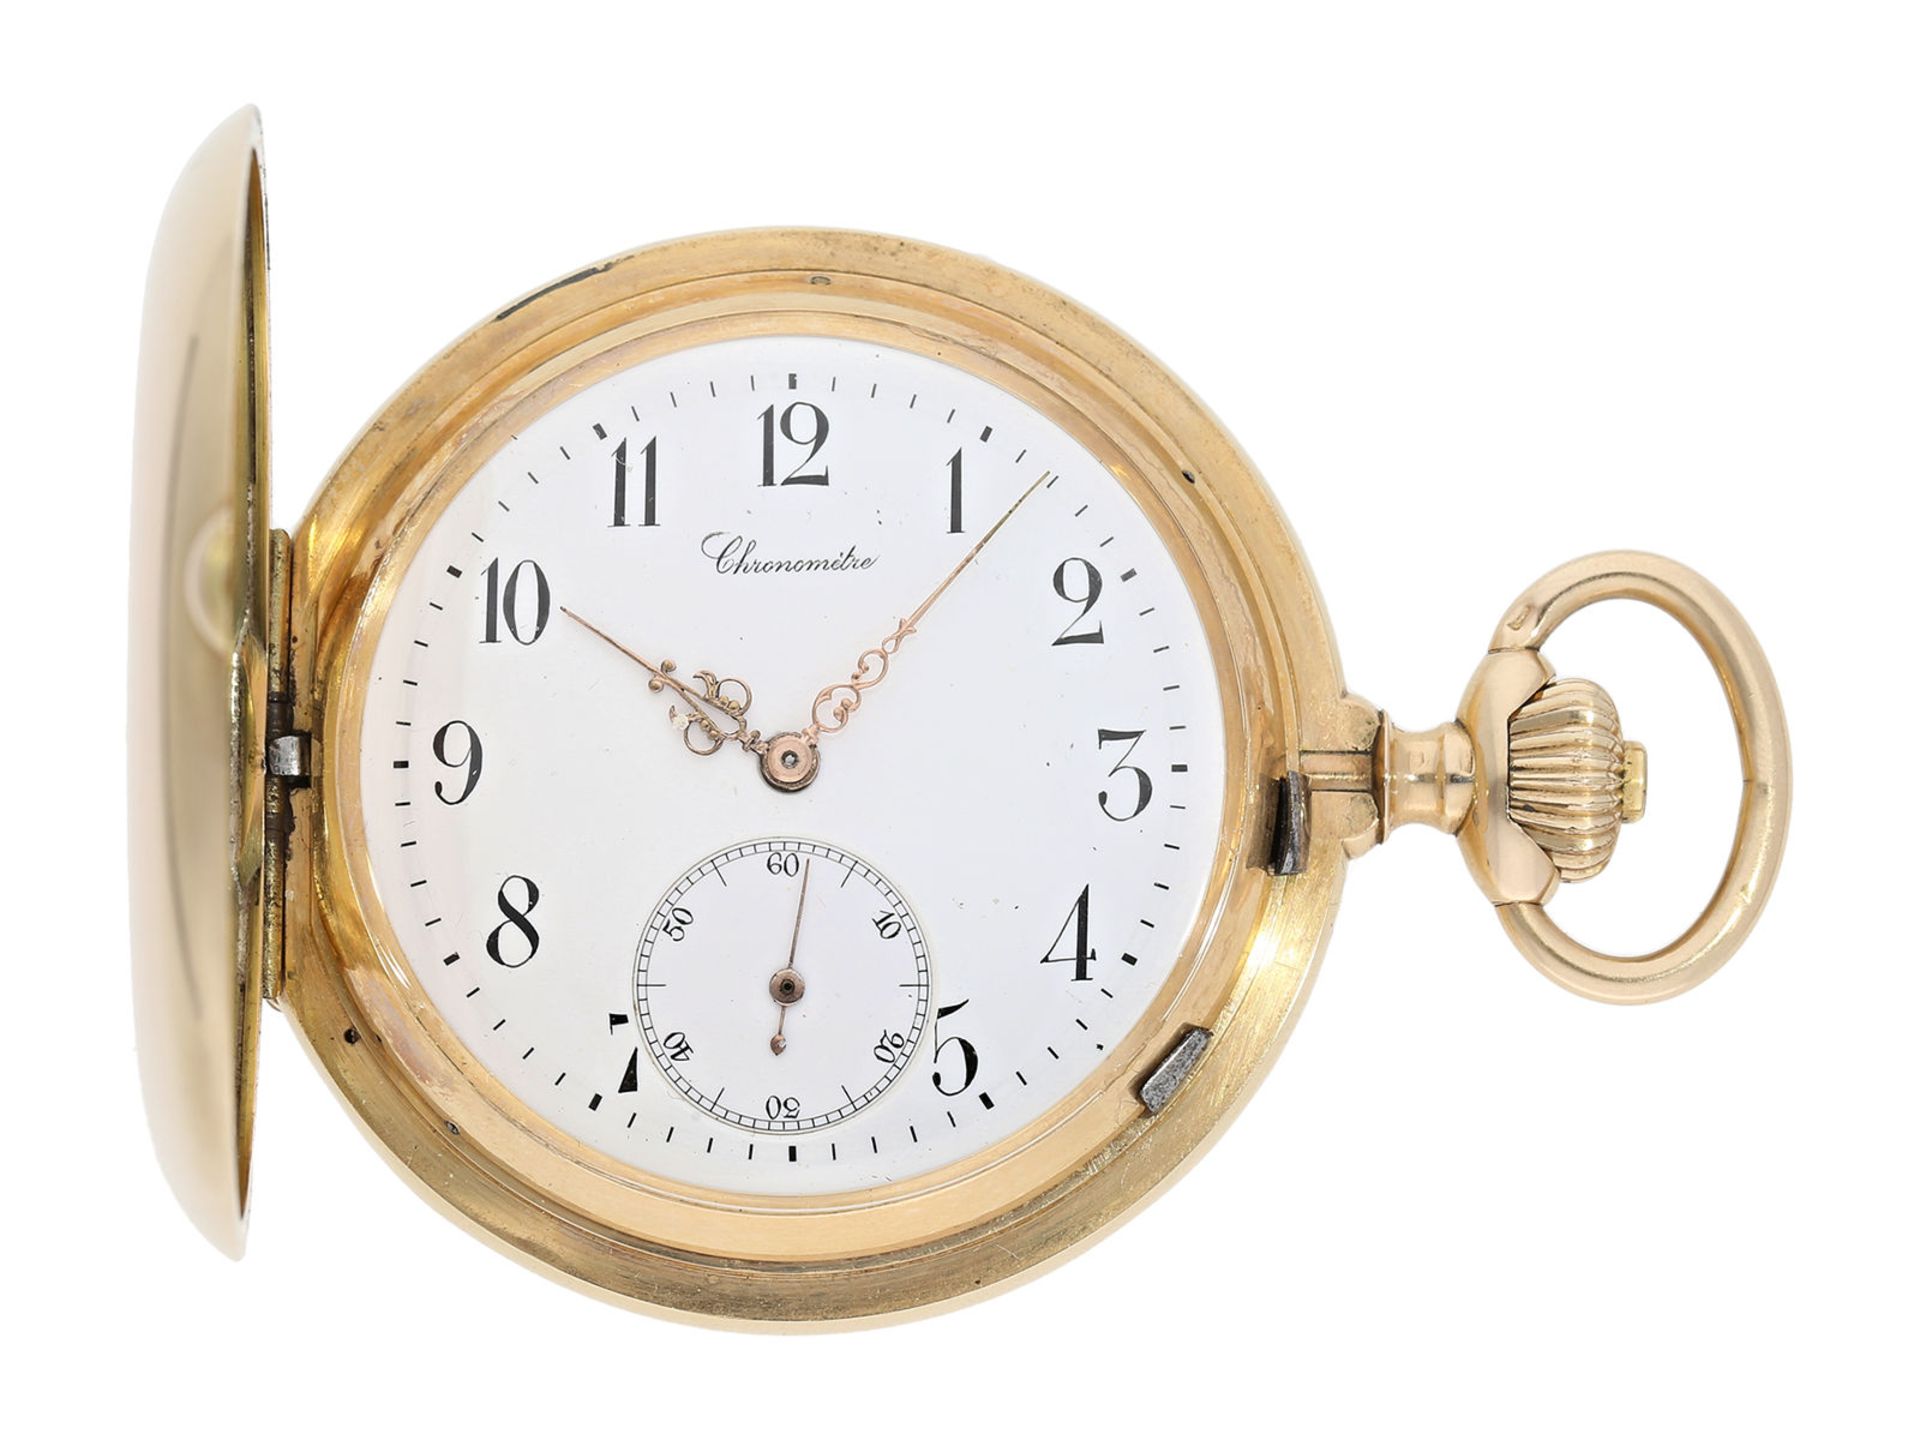 Pocket watch: extremely heavy Swiss pocket watch chronometer with pivoted detent chronometer